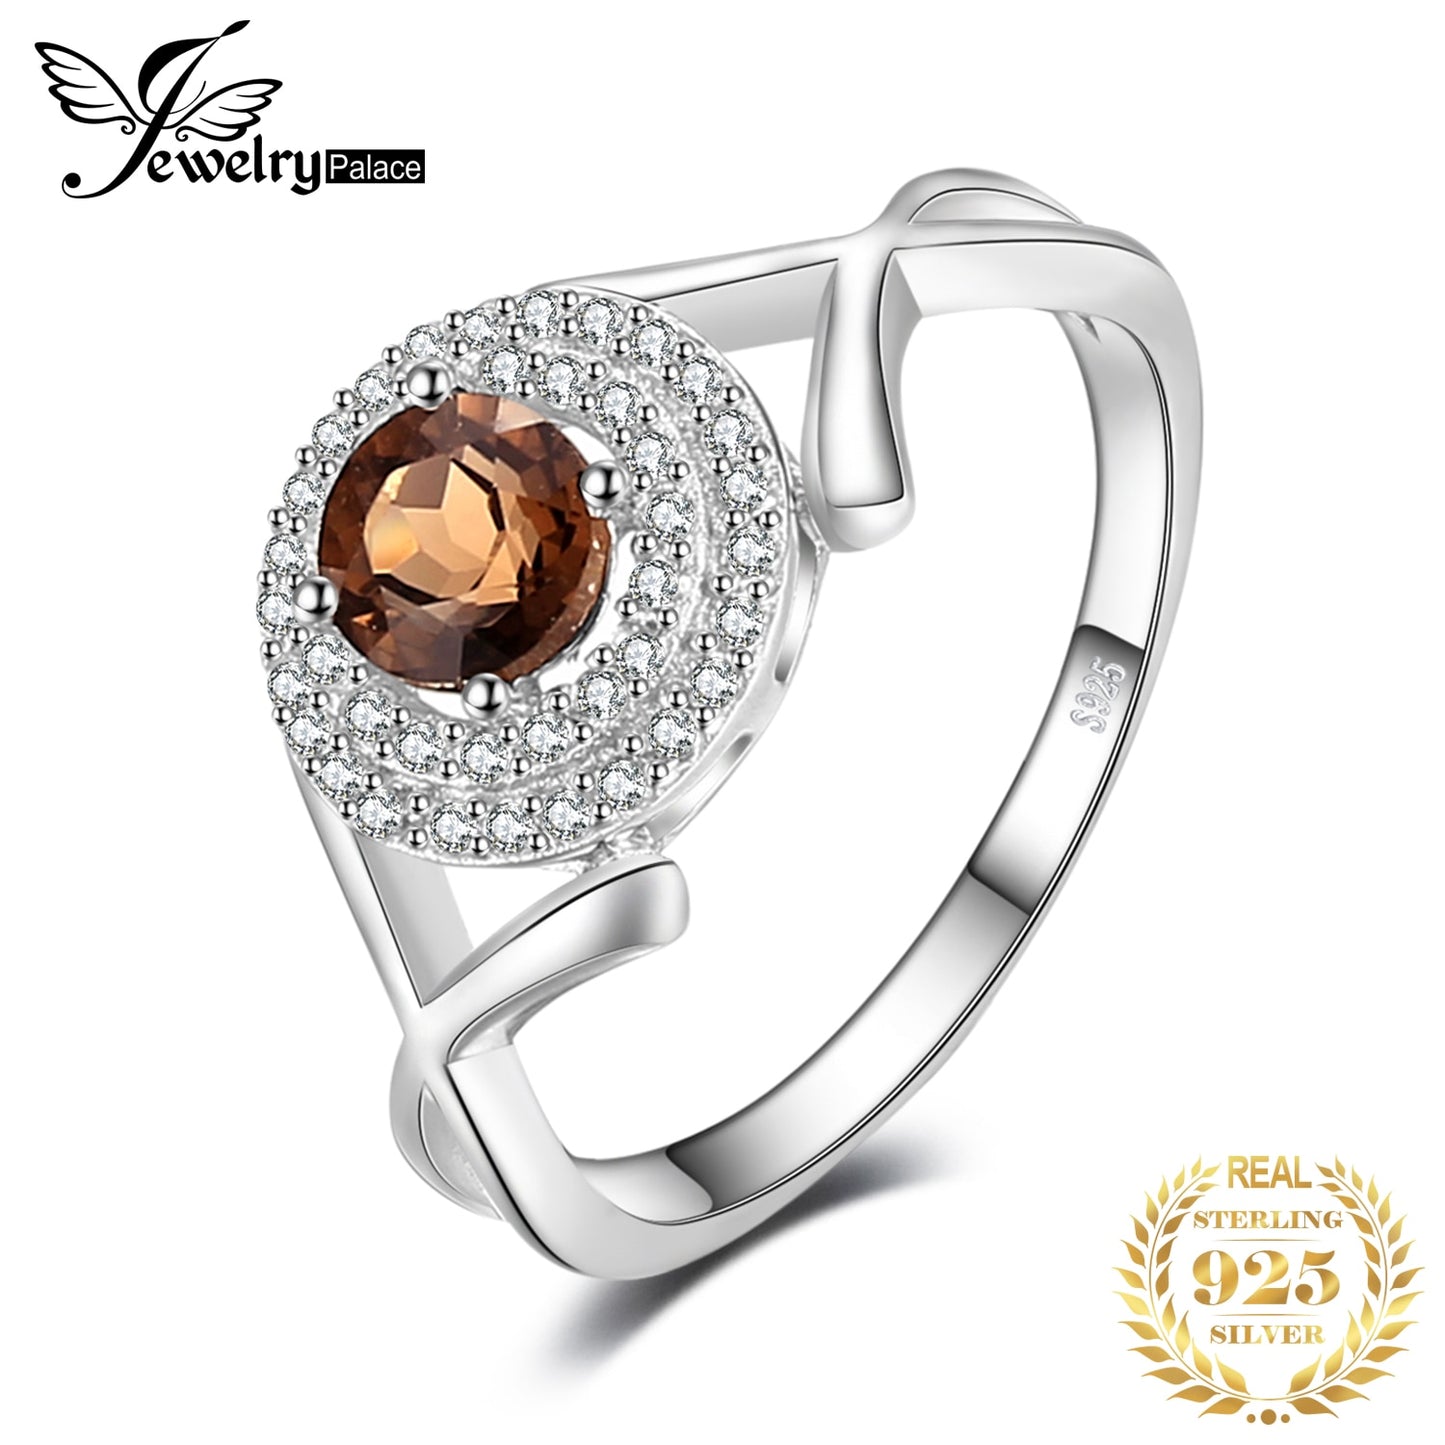 JewelryPalace Round Genuine Natural Smoky Quartz 925 Sterling Silver Ring for Women Fashion Statement Halo Gemstone Jewelry